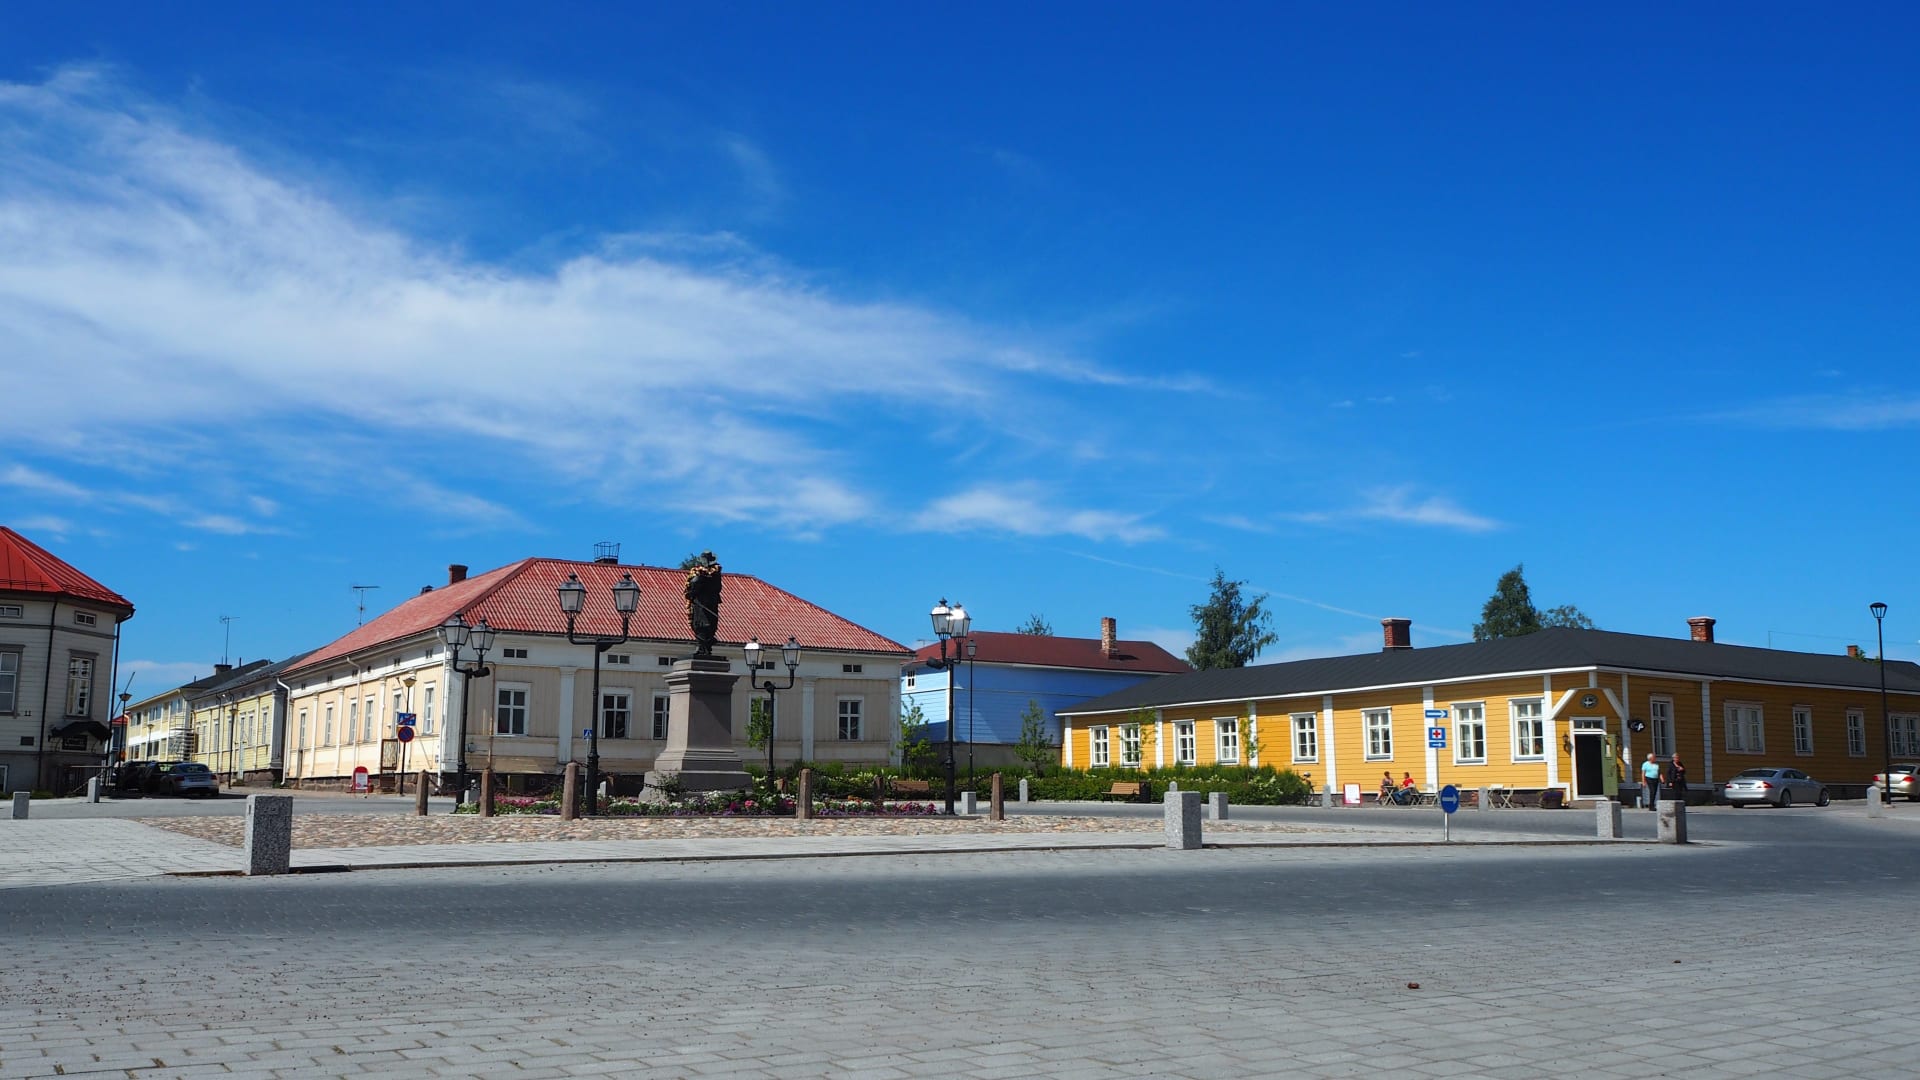 one corner of Pekkatori square with old wooden houses in white, yellow and blue